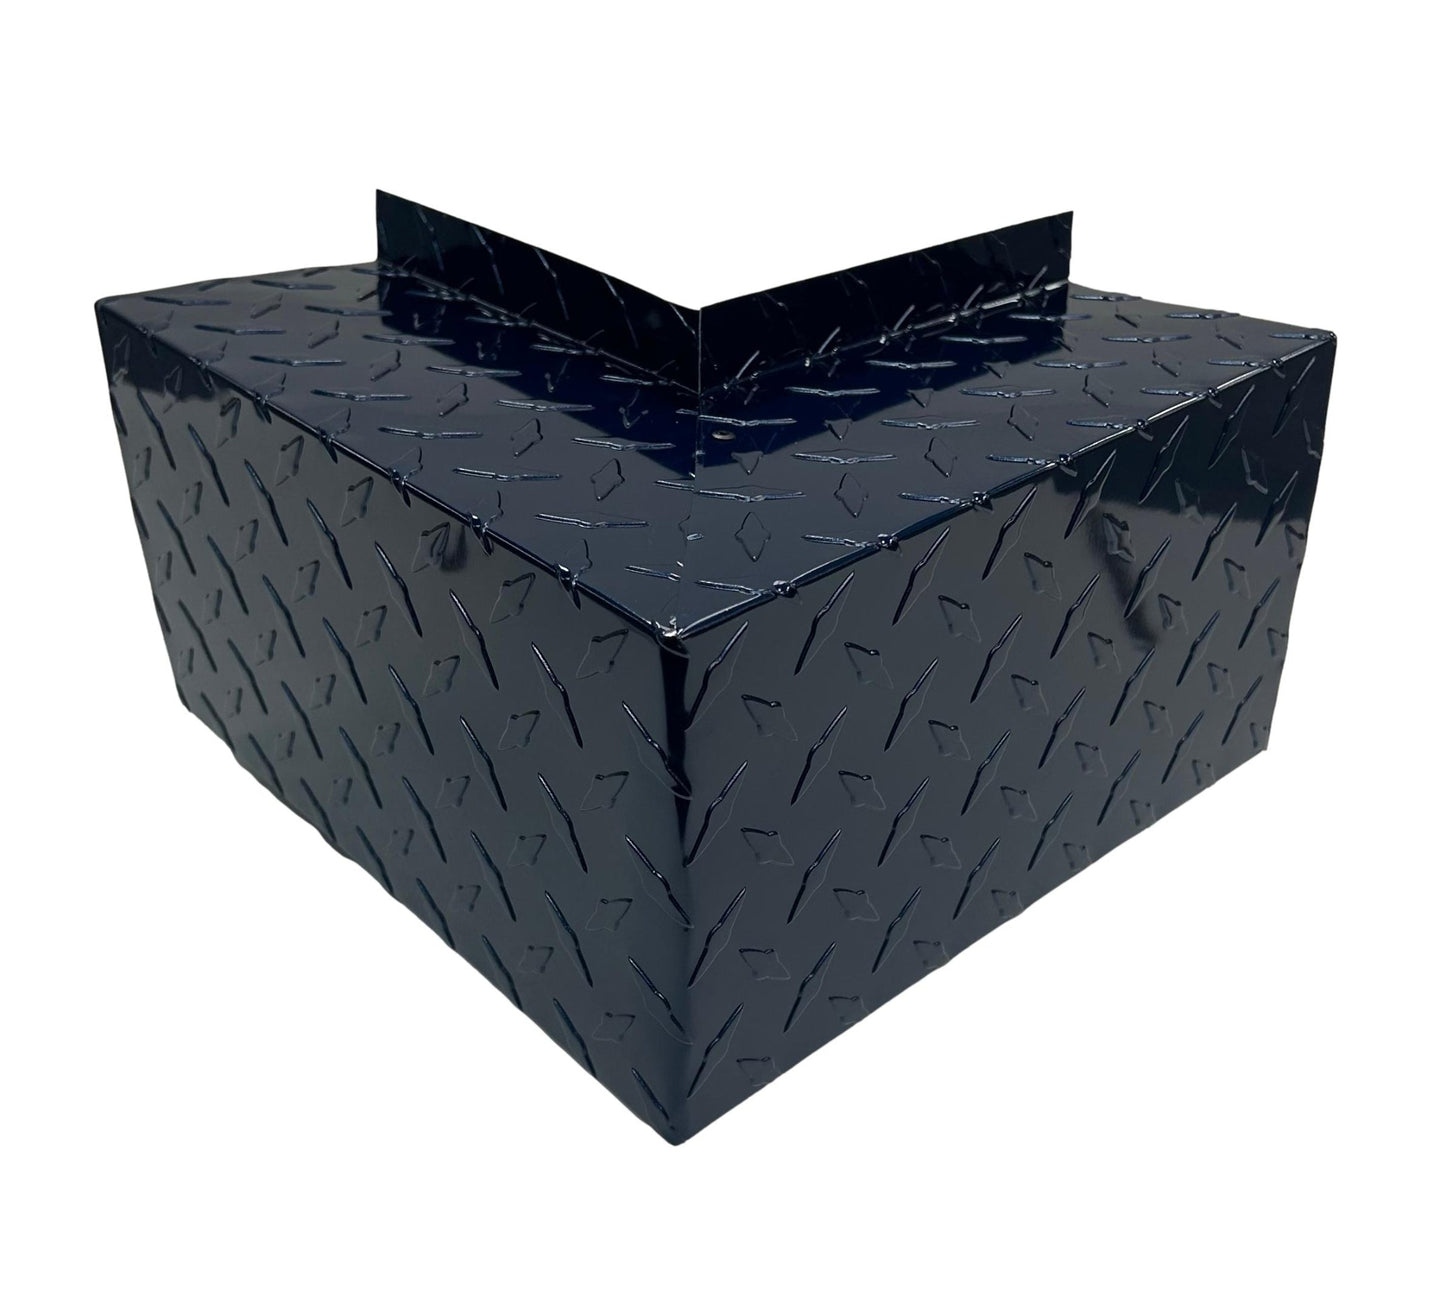 A black metal box with a triangular pattern is shaped like a right-angle corner piece. Its reflective surface and angular design give it an industrial appearance. The box, featuring Residential Series - Line Set Cover Outside Corner Elbows - Premium Quality by Perma Cover, appears to be designed for fitting into a corner for simple and easy installation.